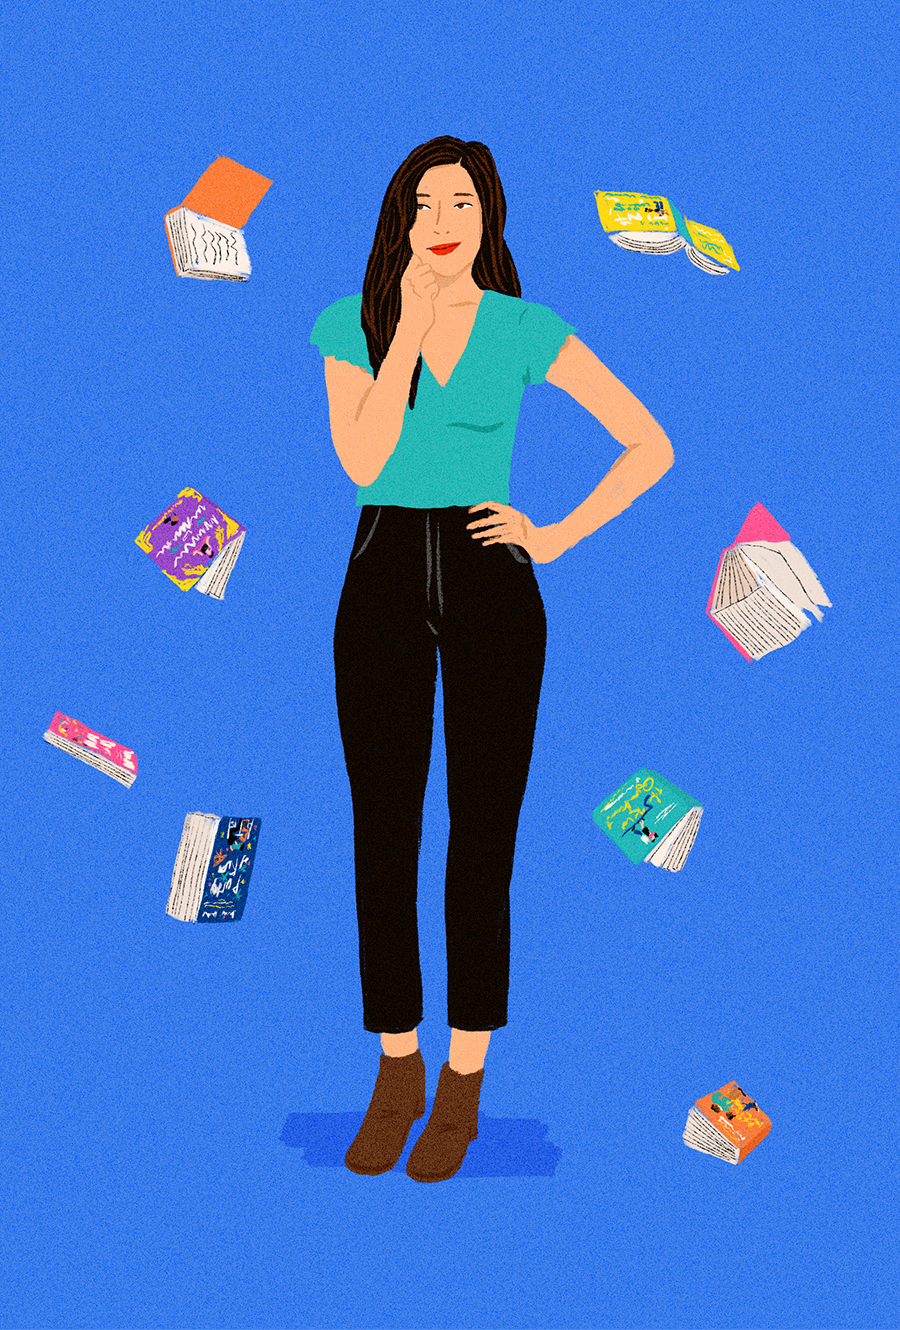 An illustrated book cover of an Asian American woman with long brown hair and red lipstick. She has one hand on her hip and the other on her chin in a curious pose. There are colorful books flying around her on a blue background.